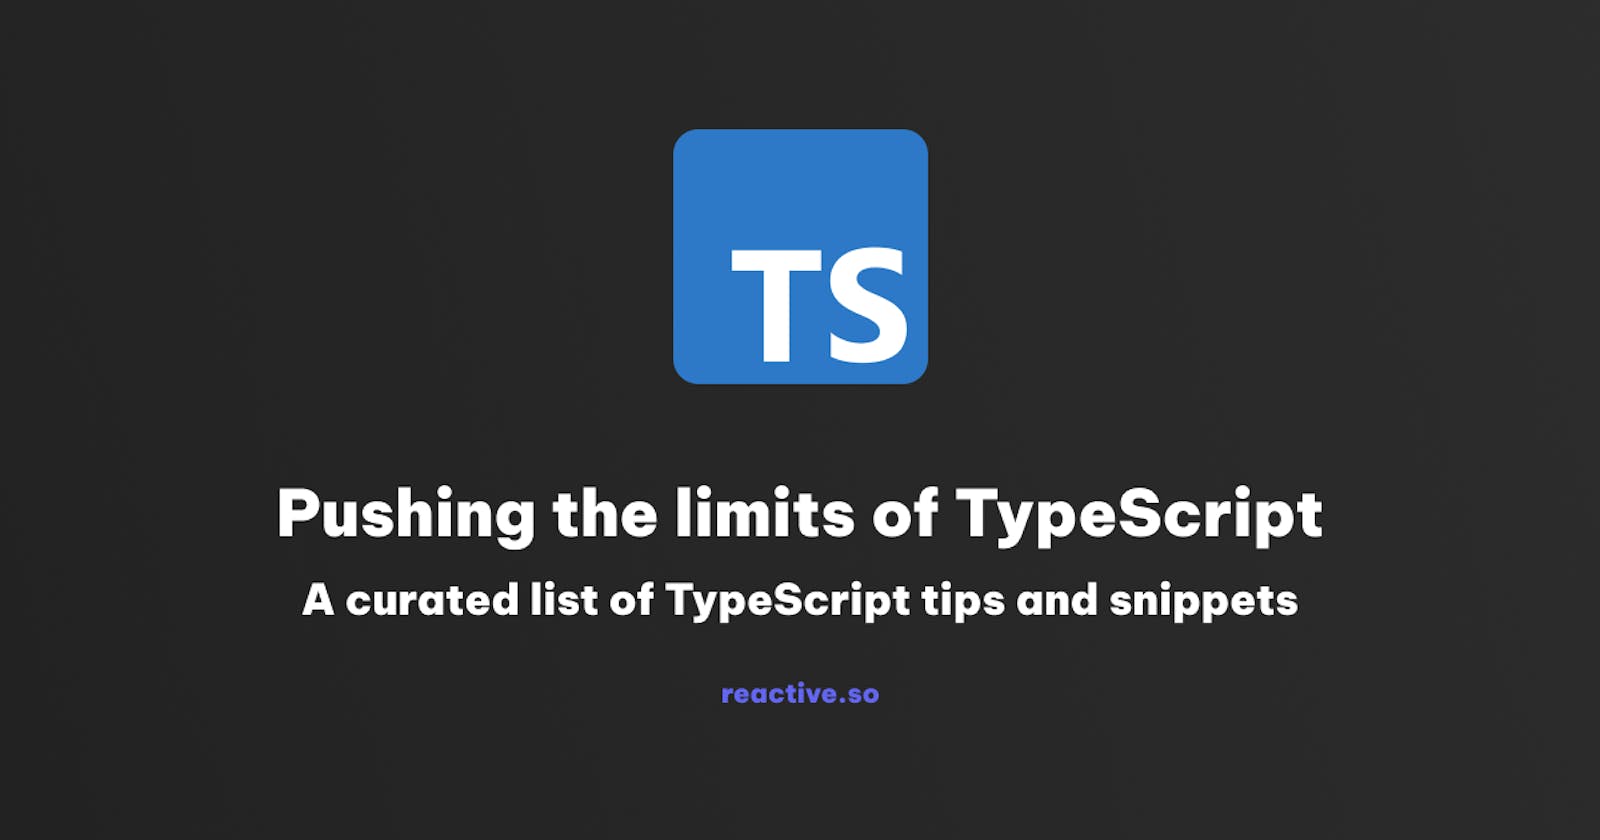 Pushing the limits of TypeScript